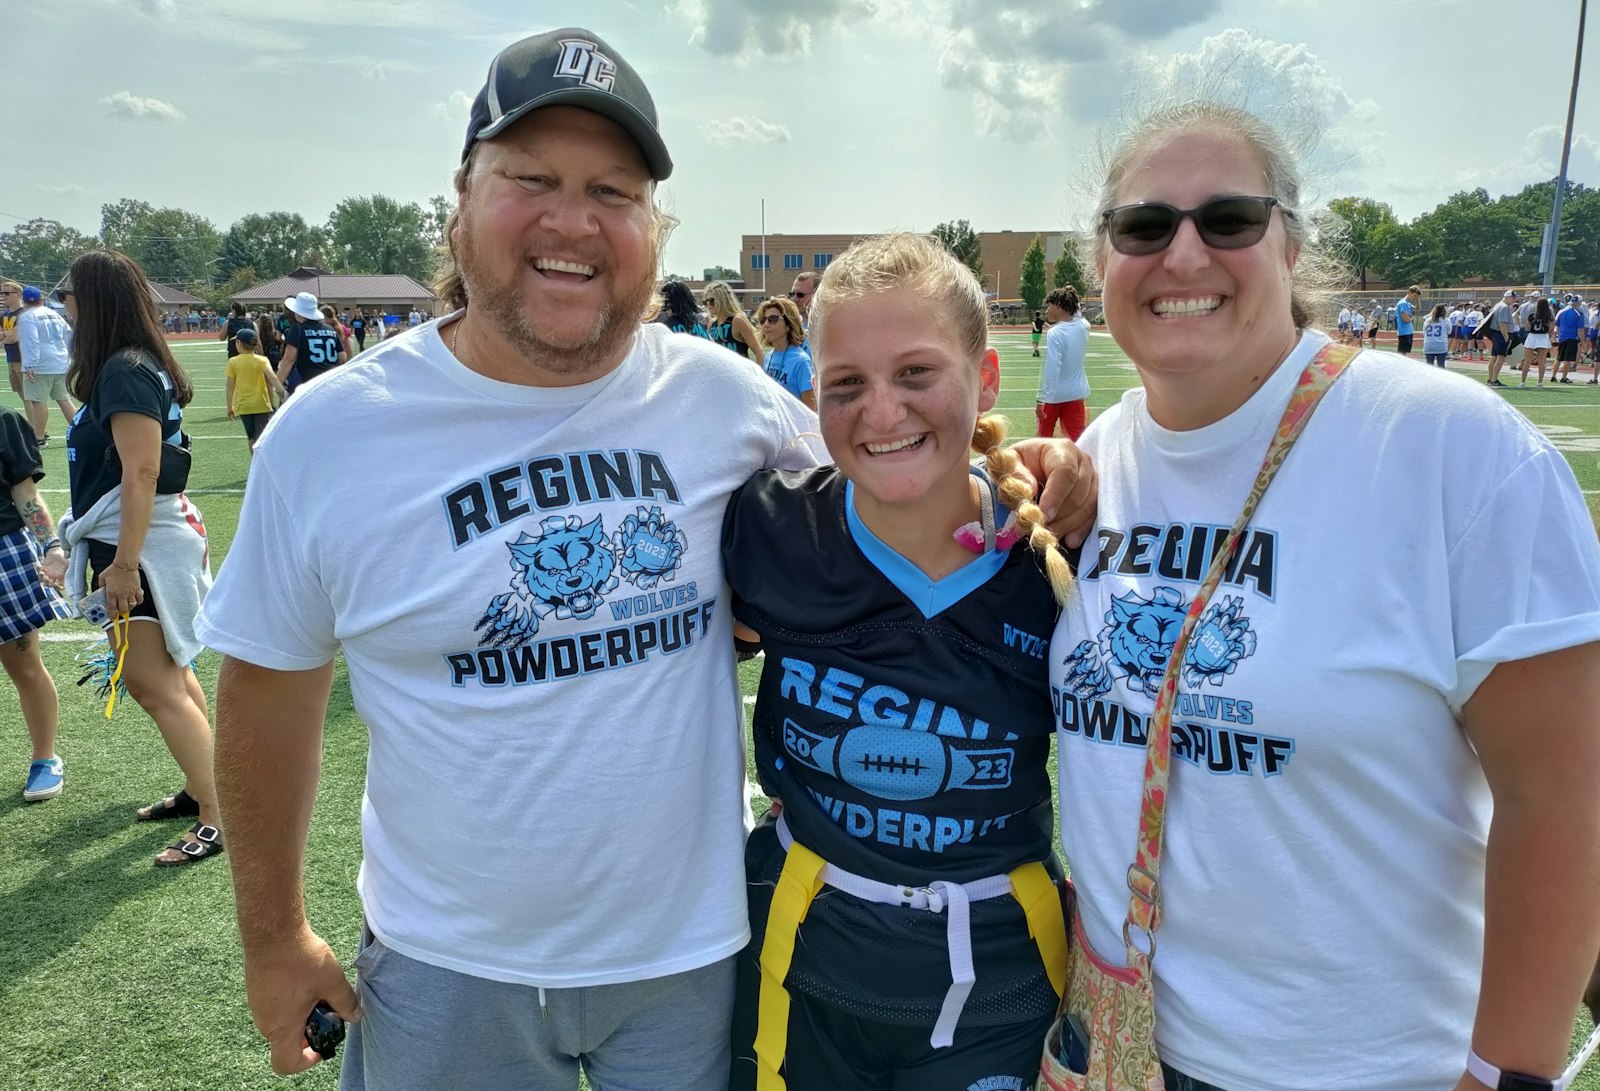 Savannah Weaver – flanked by her father Scott and mother Alison (Regina 1996) -- 	was punched in the face on the game’s first play, but she got the last laugh, Regina’s sixth straight powder puff victory against Marian. (Don Horkey | Special to Detroit Catholic)